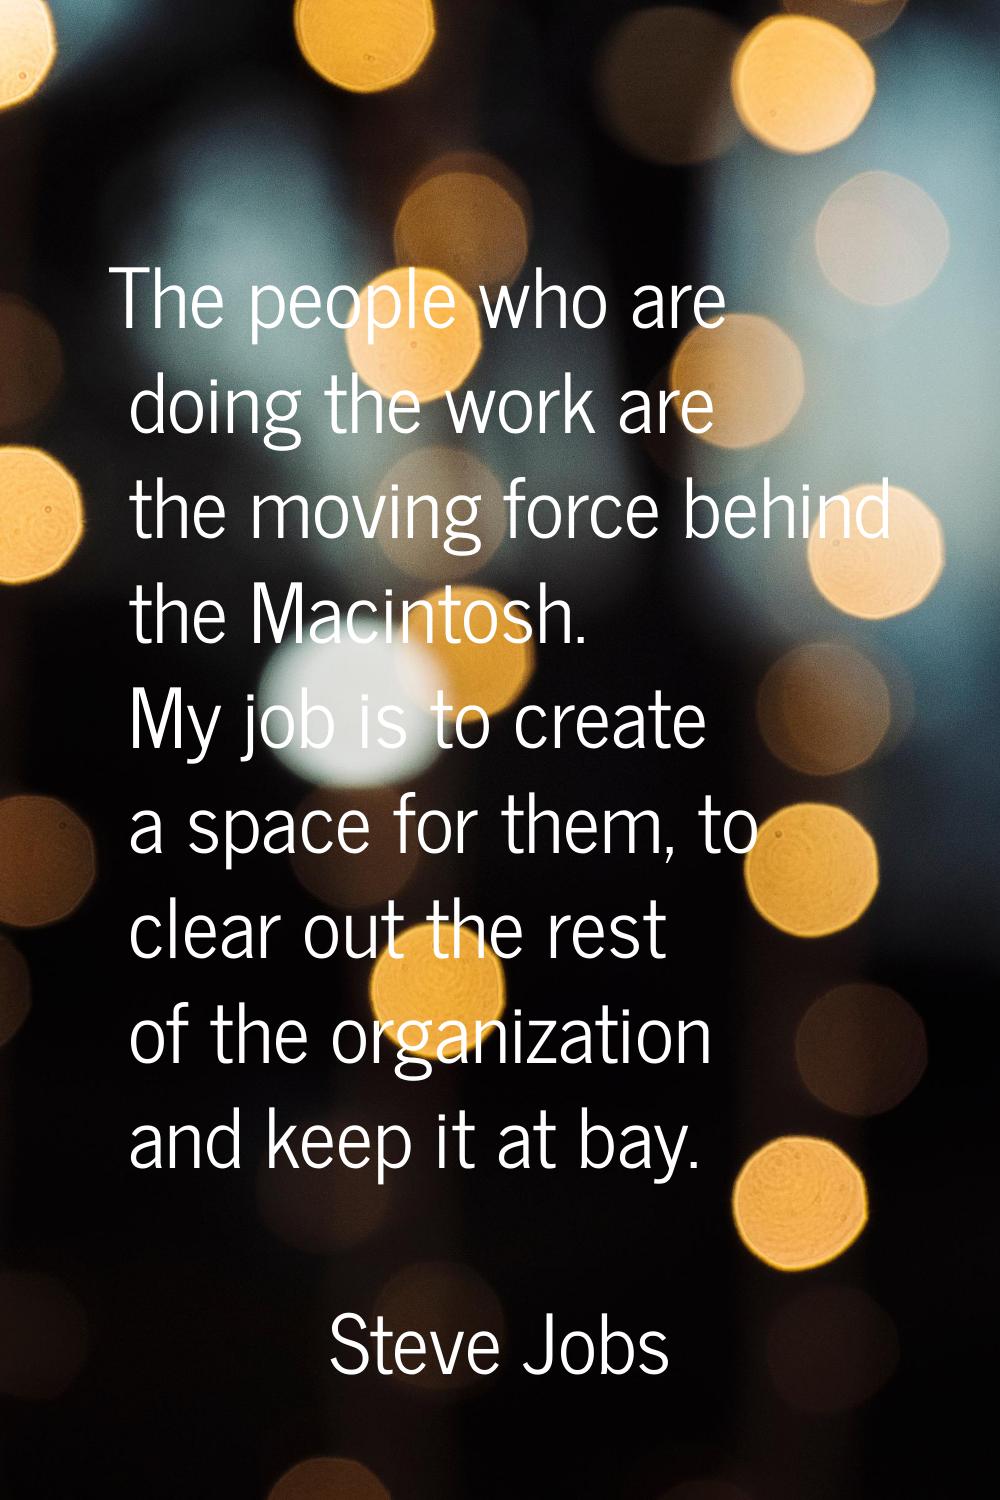 The people who are doing the work are the moving force behind the Macintosh. My job is to create a 